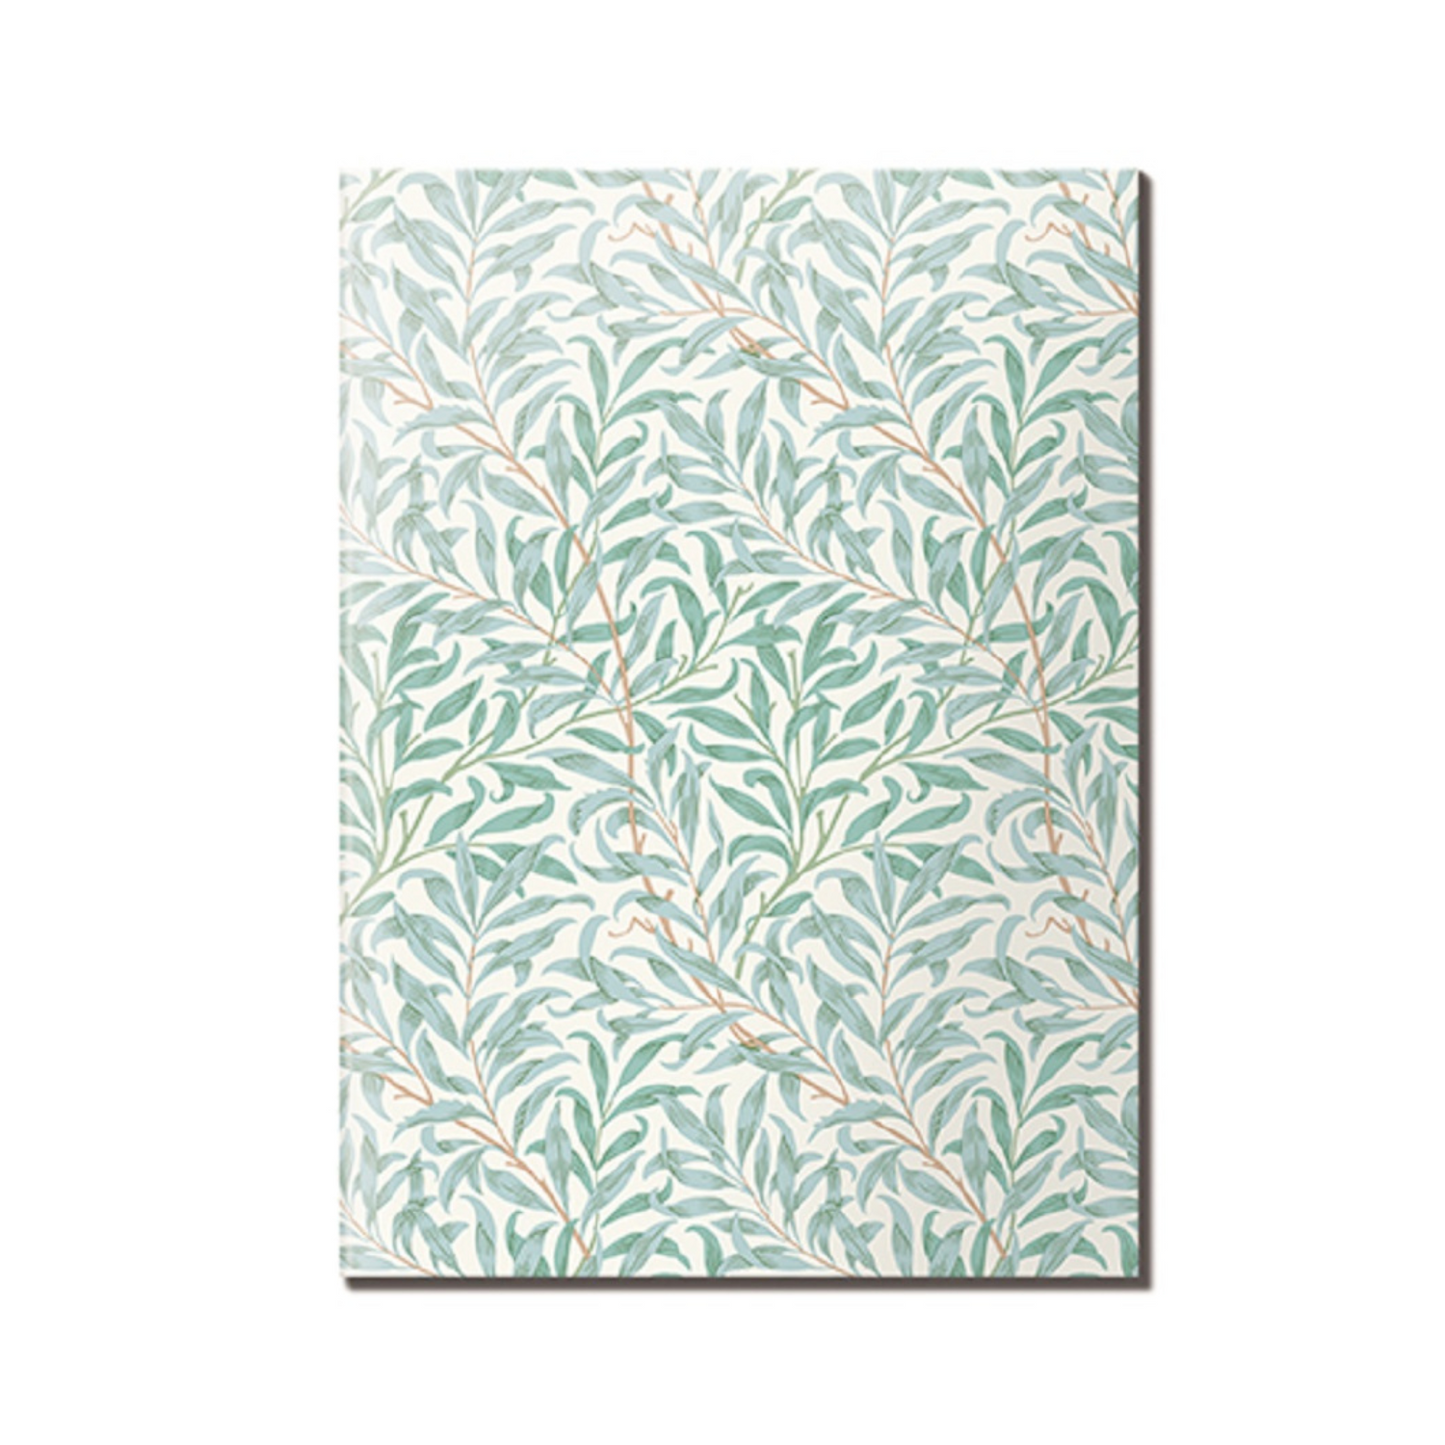 William Morris Set Of 3 A6 Notebooks In Mixed Designs